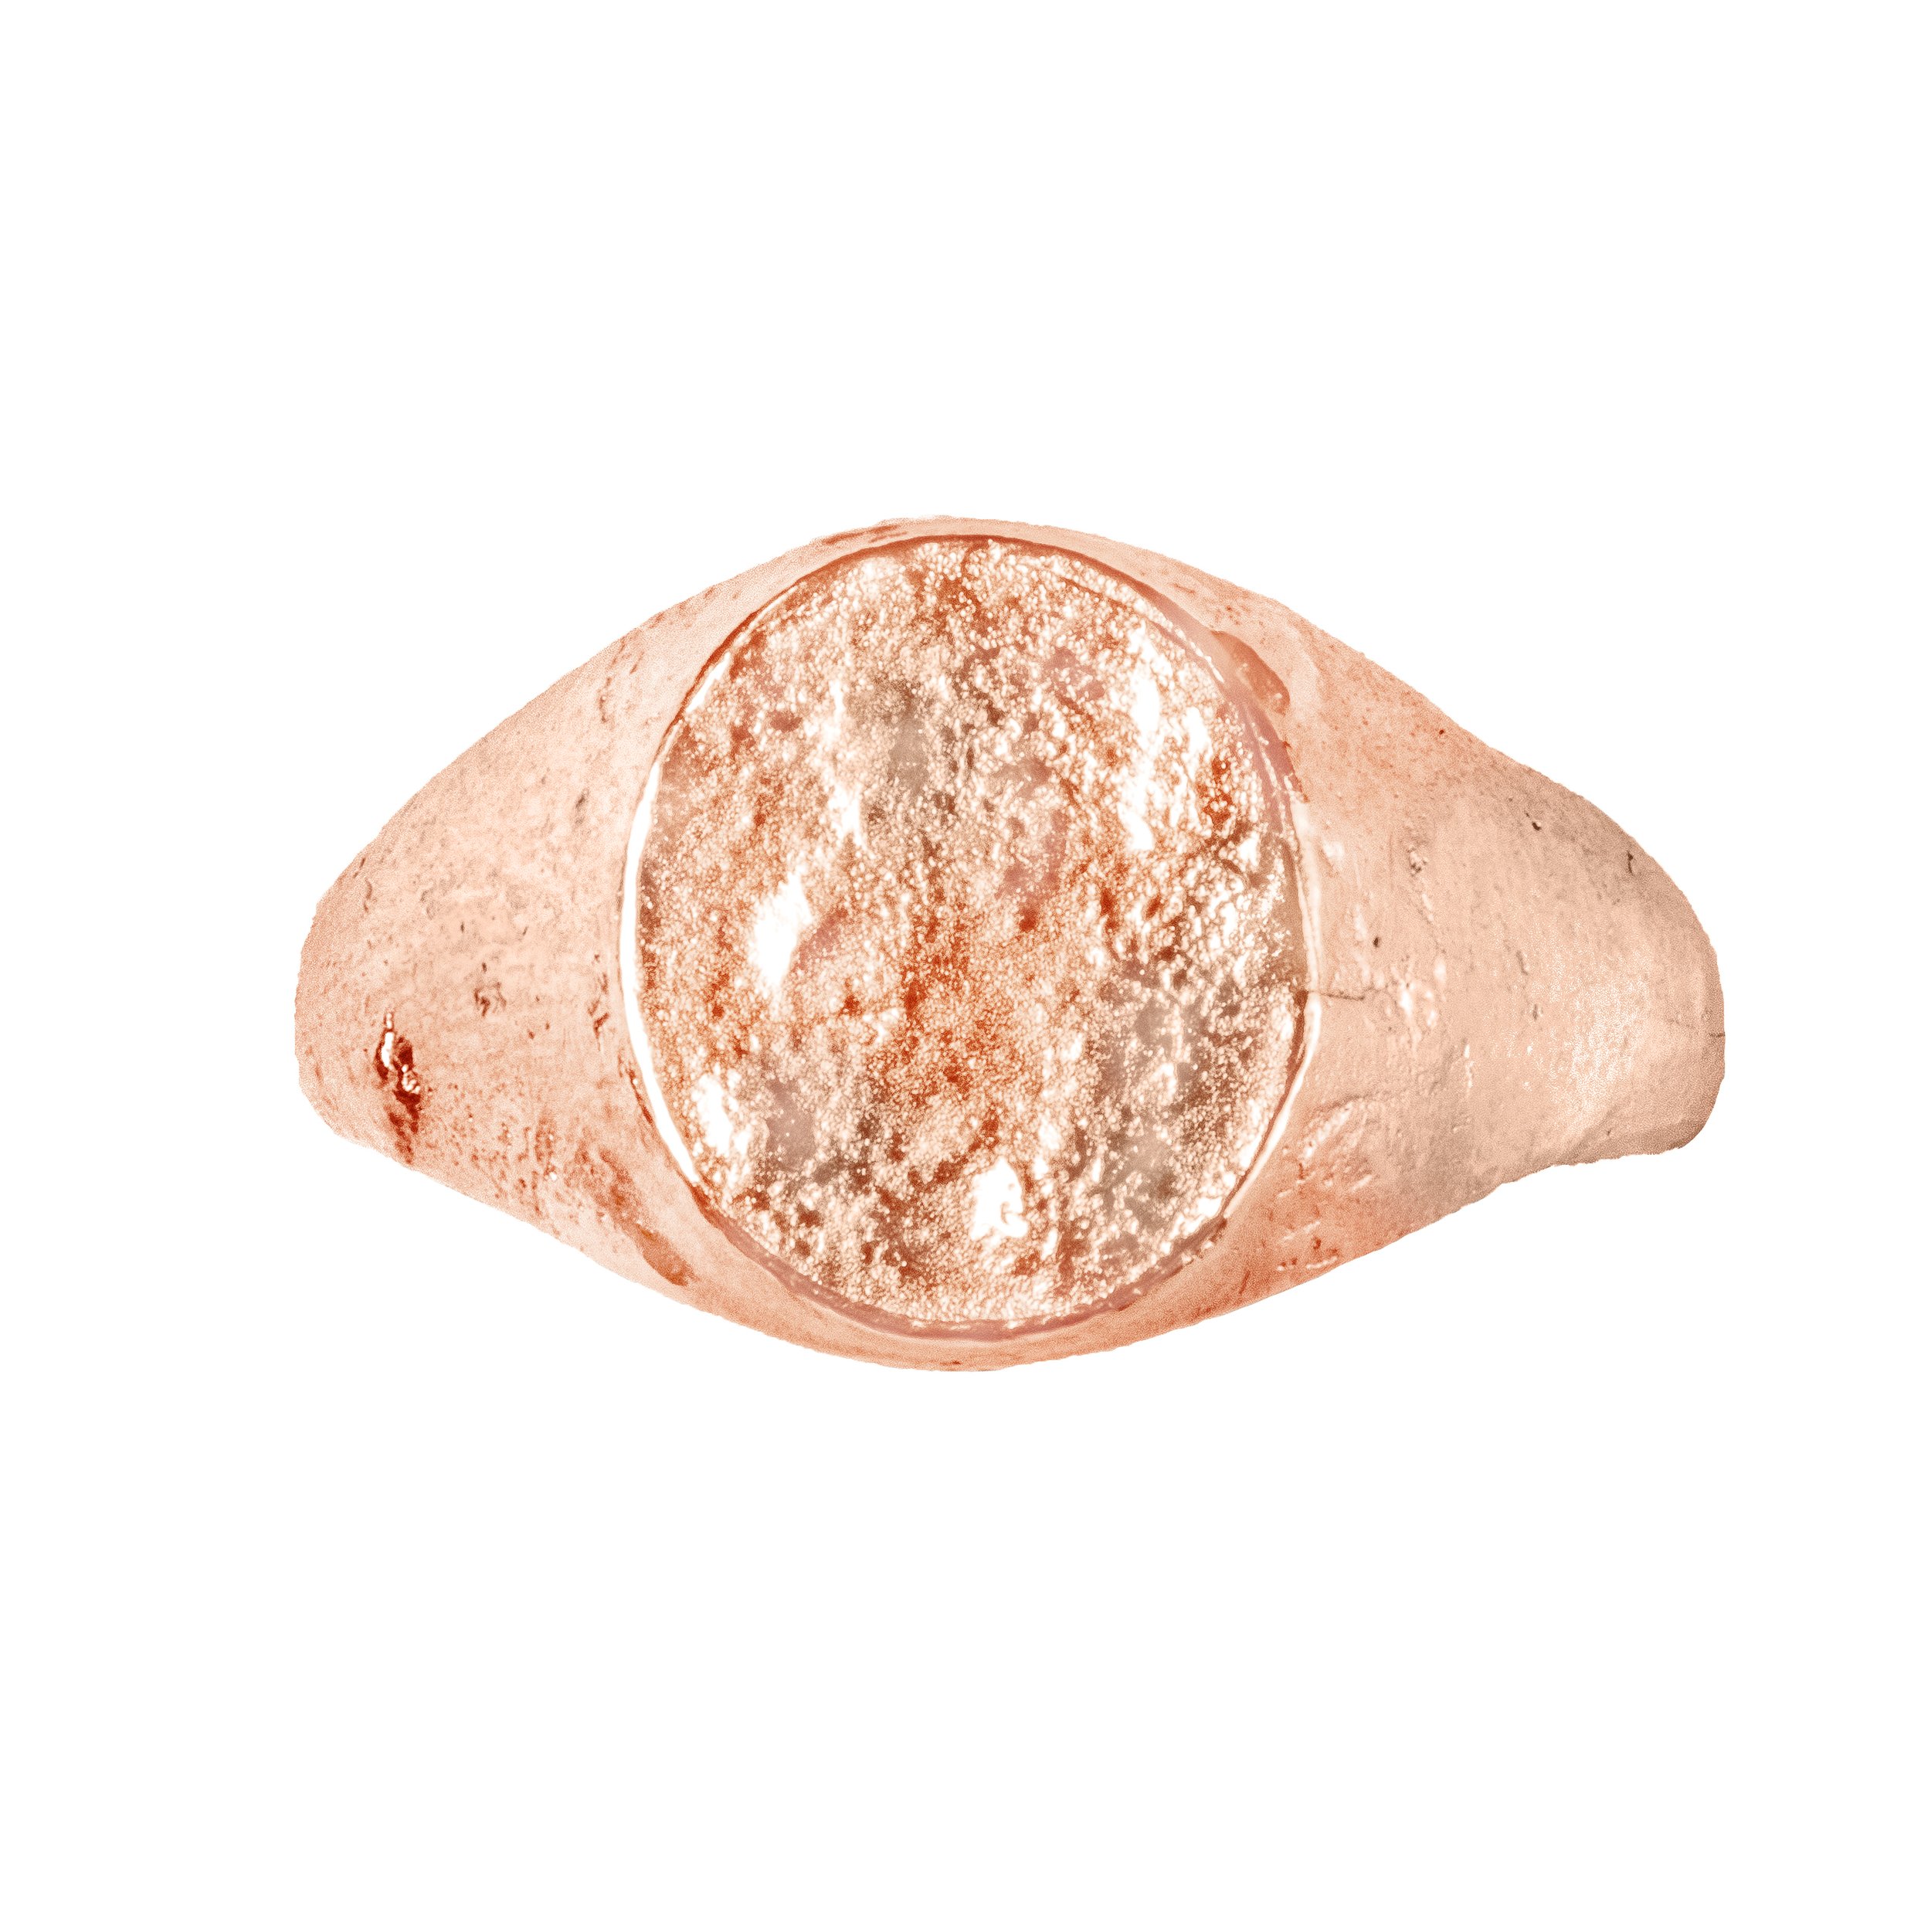 9ct red / rose gold light weight signet ring